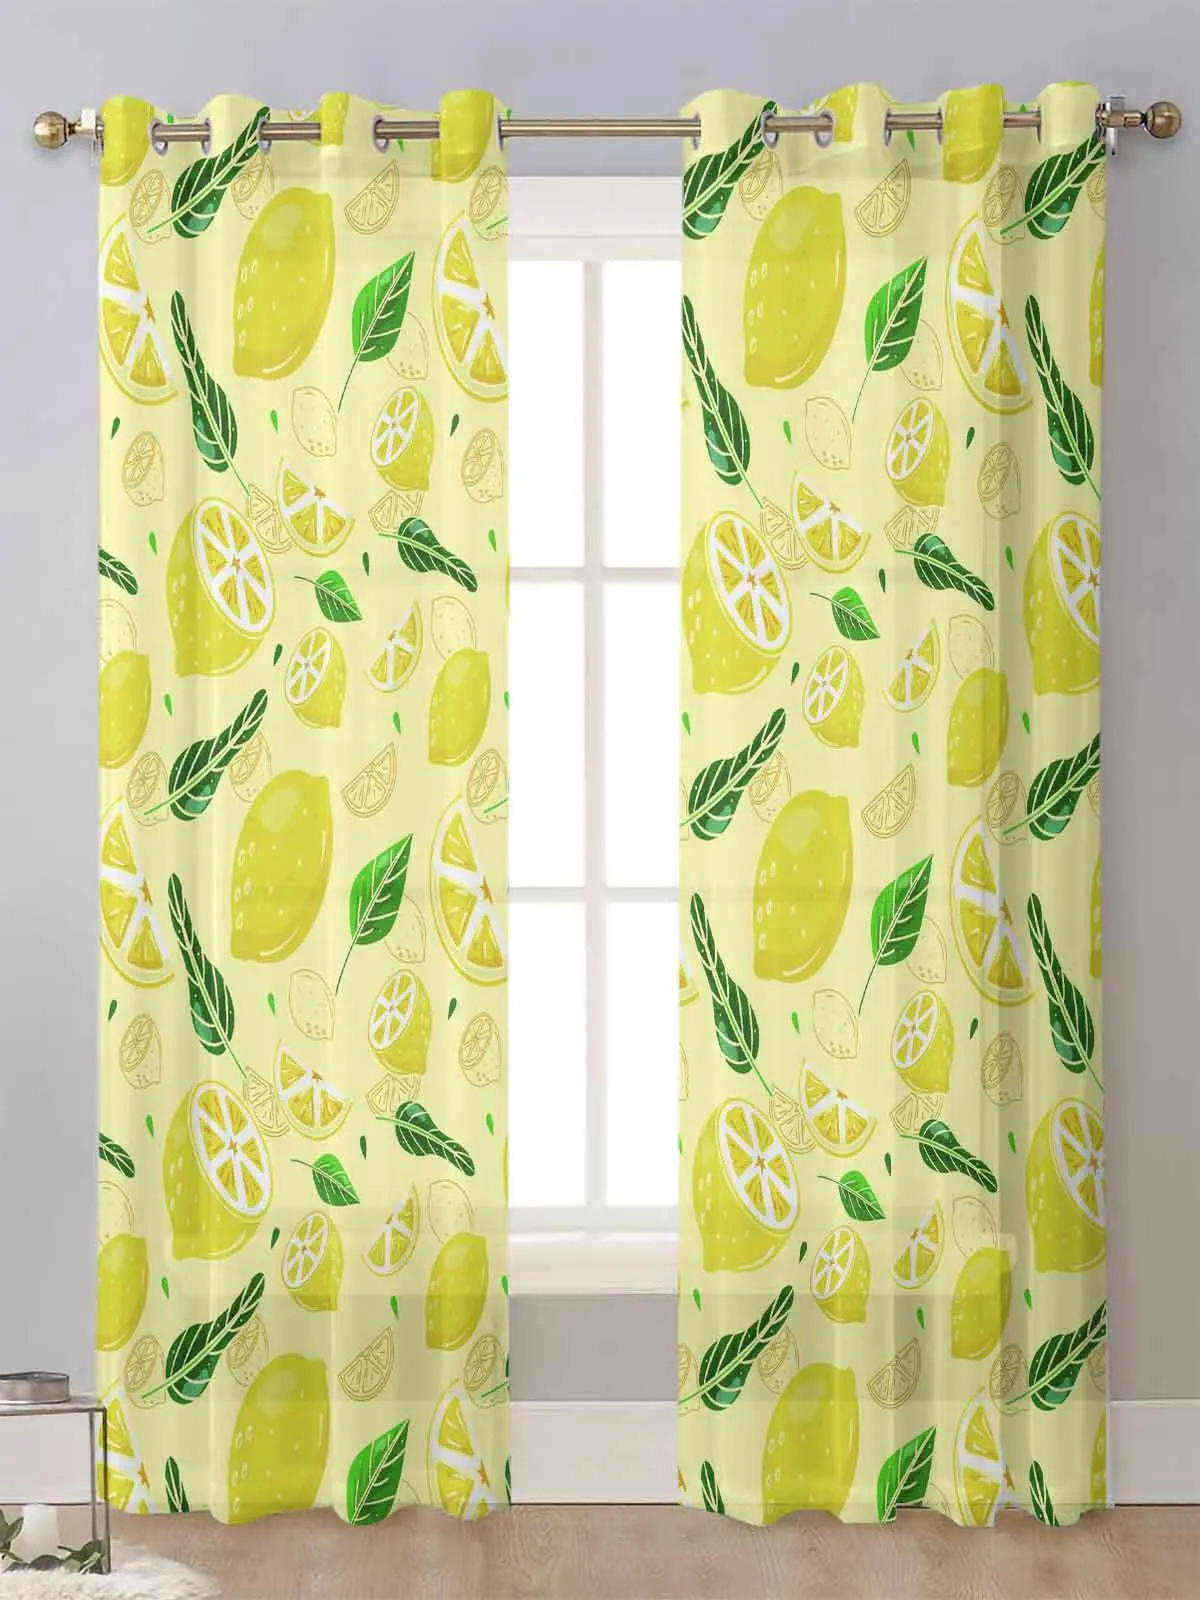 

Lemon Pattern Sheer Curtains For Living Room Window Screening Transparent Voile Tulle Curtain Cortinas Drapes Home Decor